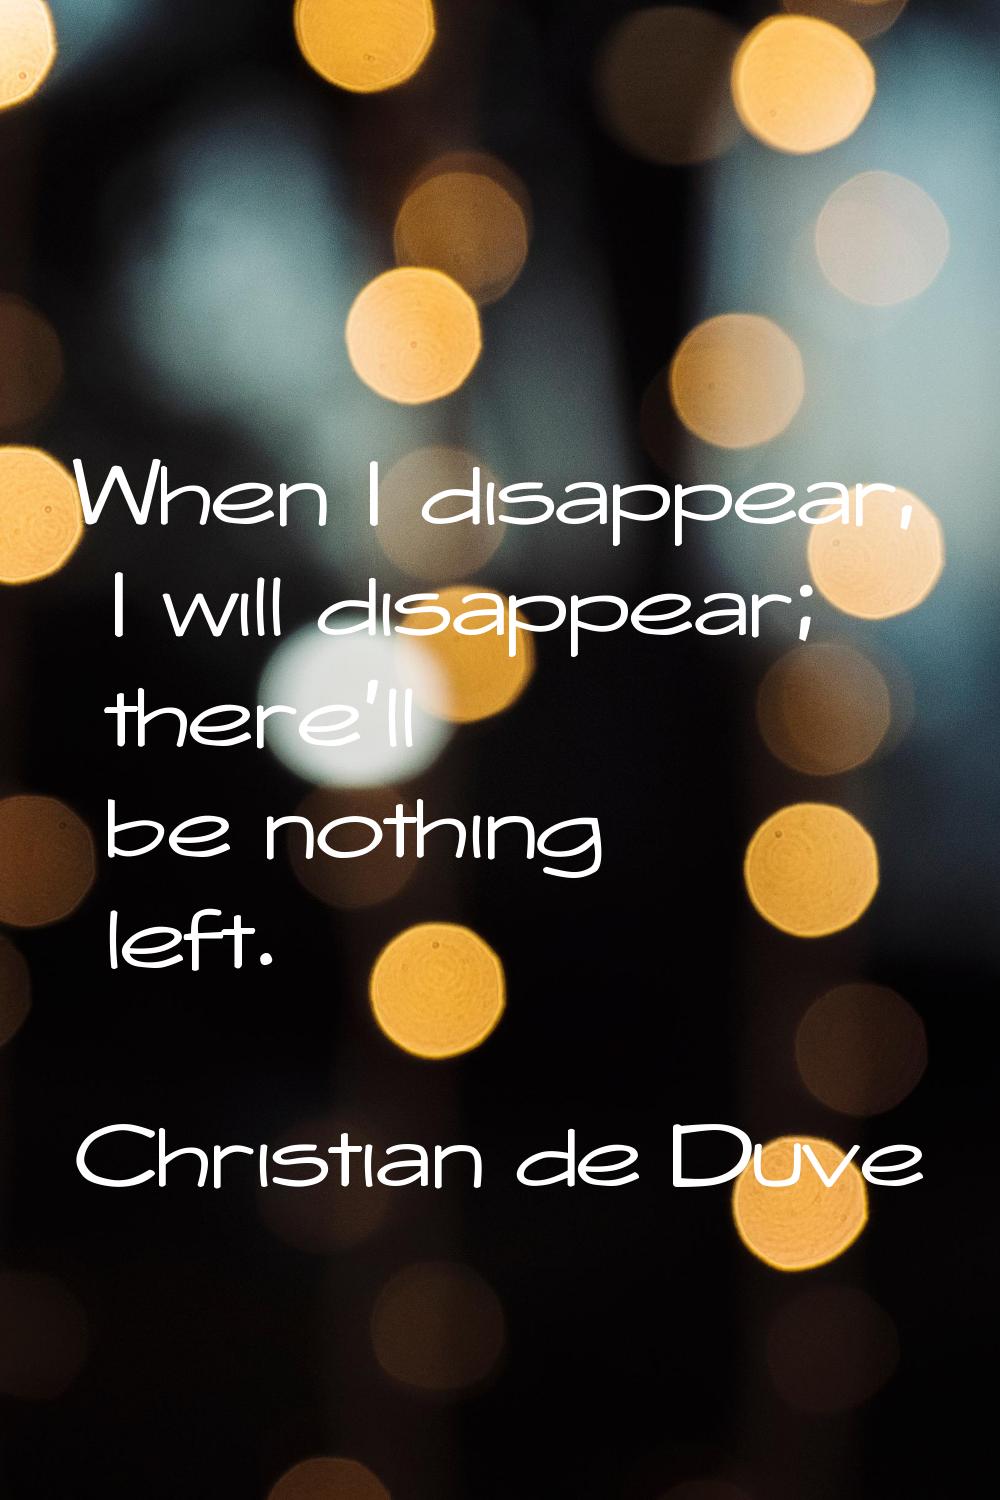 When I disappear, I will disappear; there'll be nothing left.